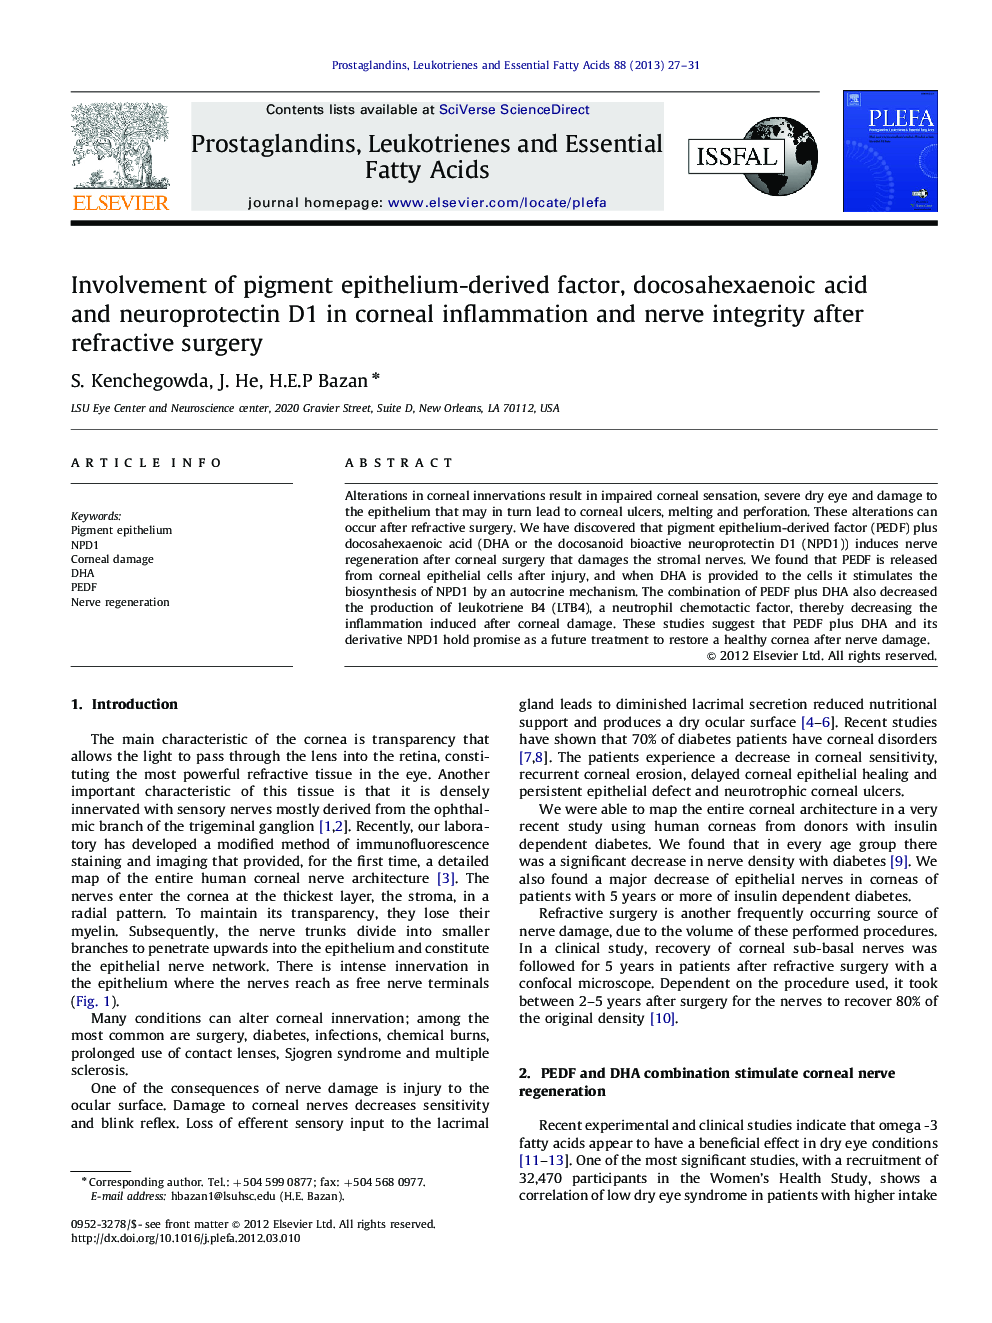 Involvement of pigment epithelium-derived factor, docosahexaenoic acid and neuroprotectin D1 in corneal inflammation and nerve integrity after refractive surgery